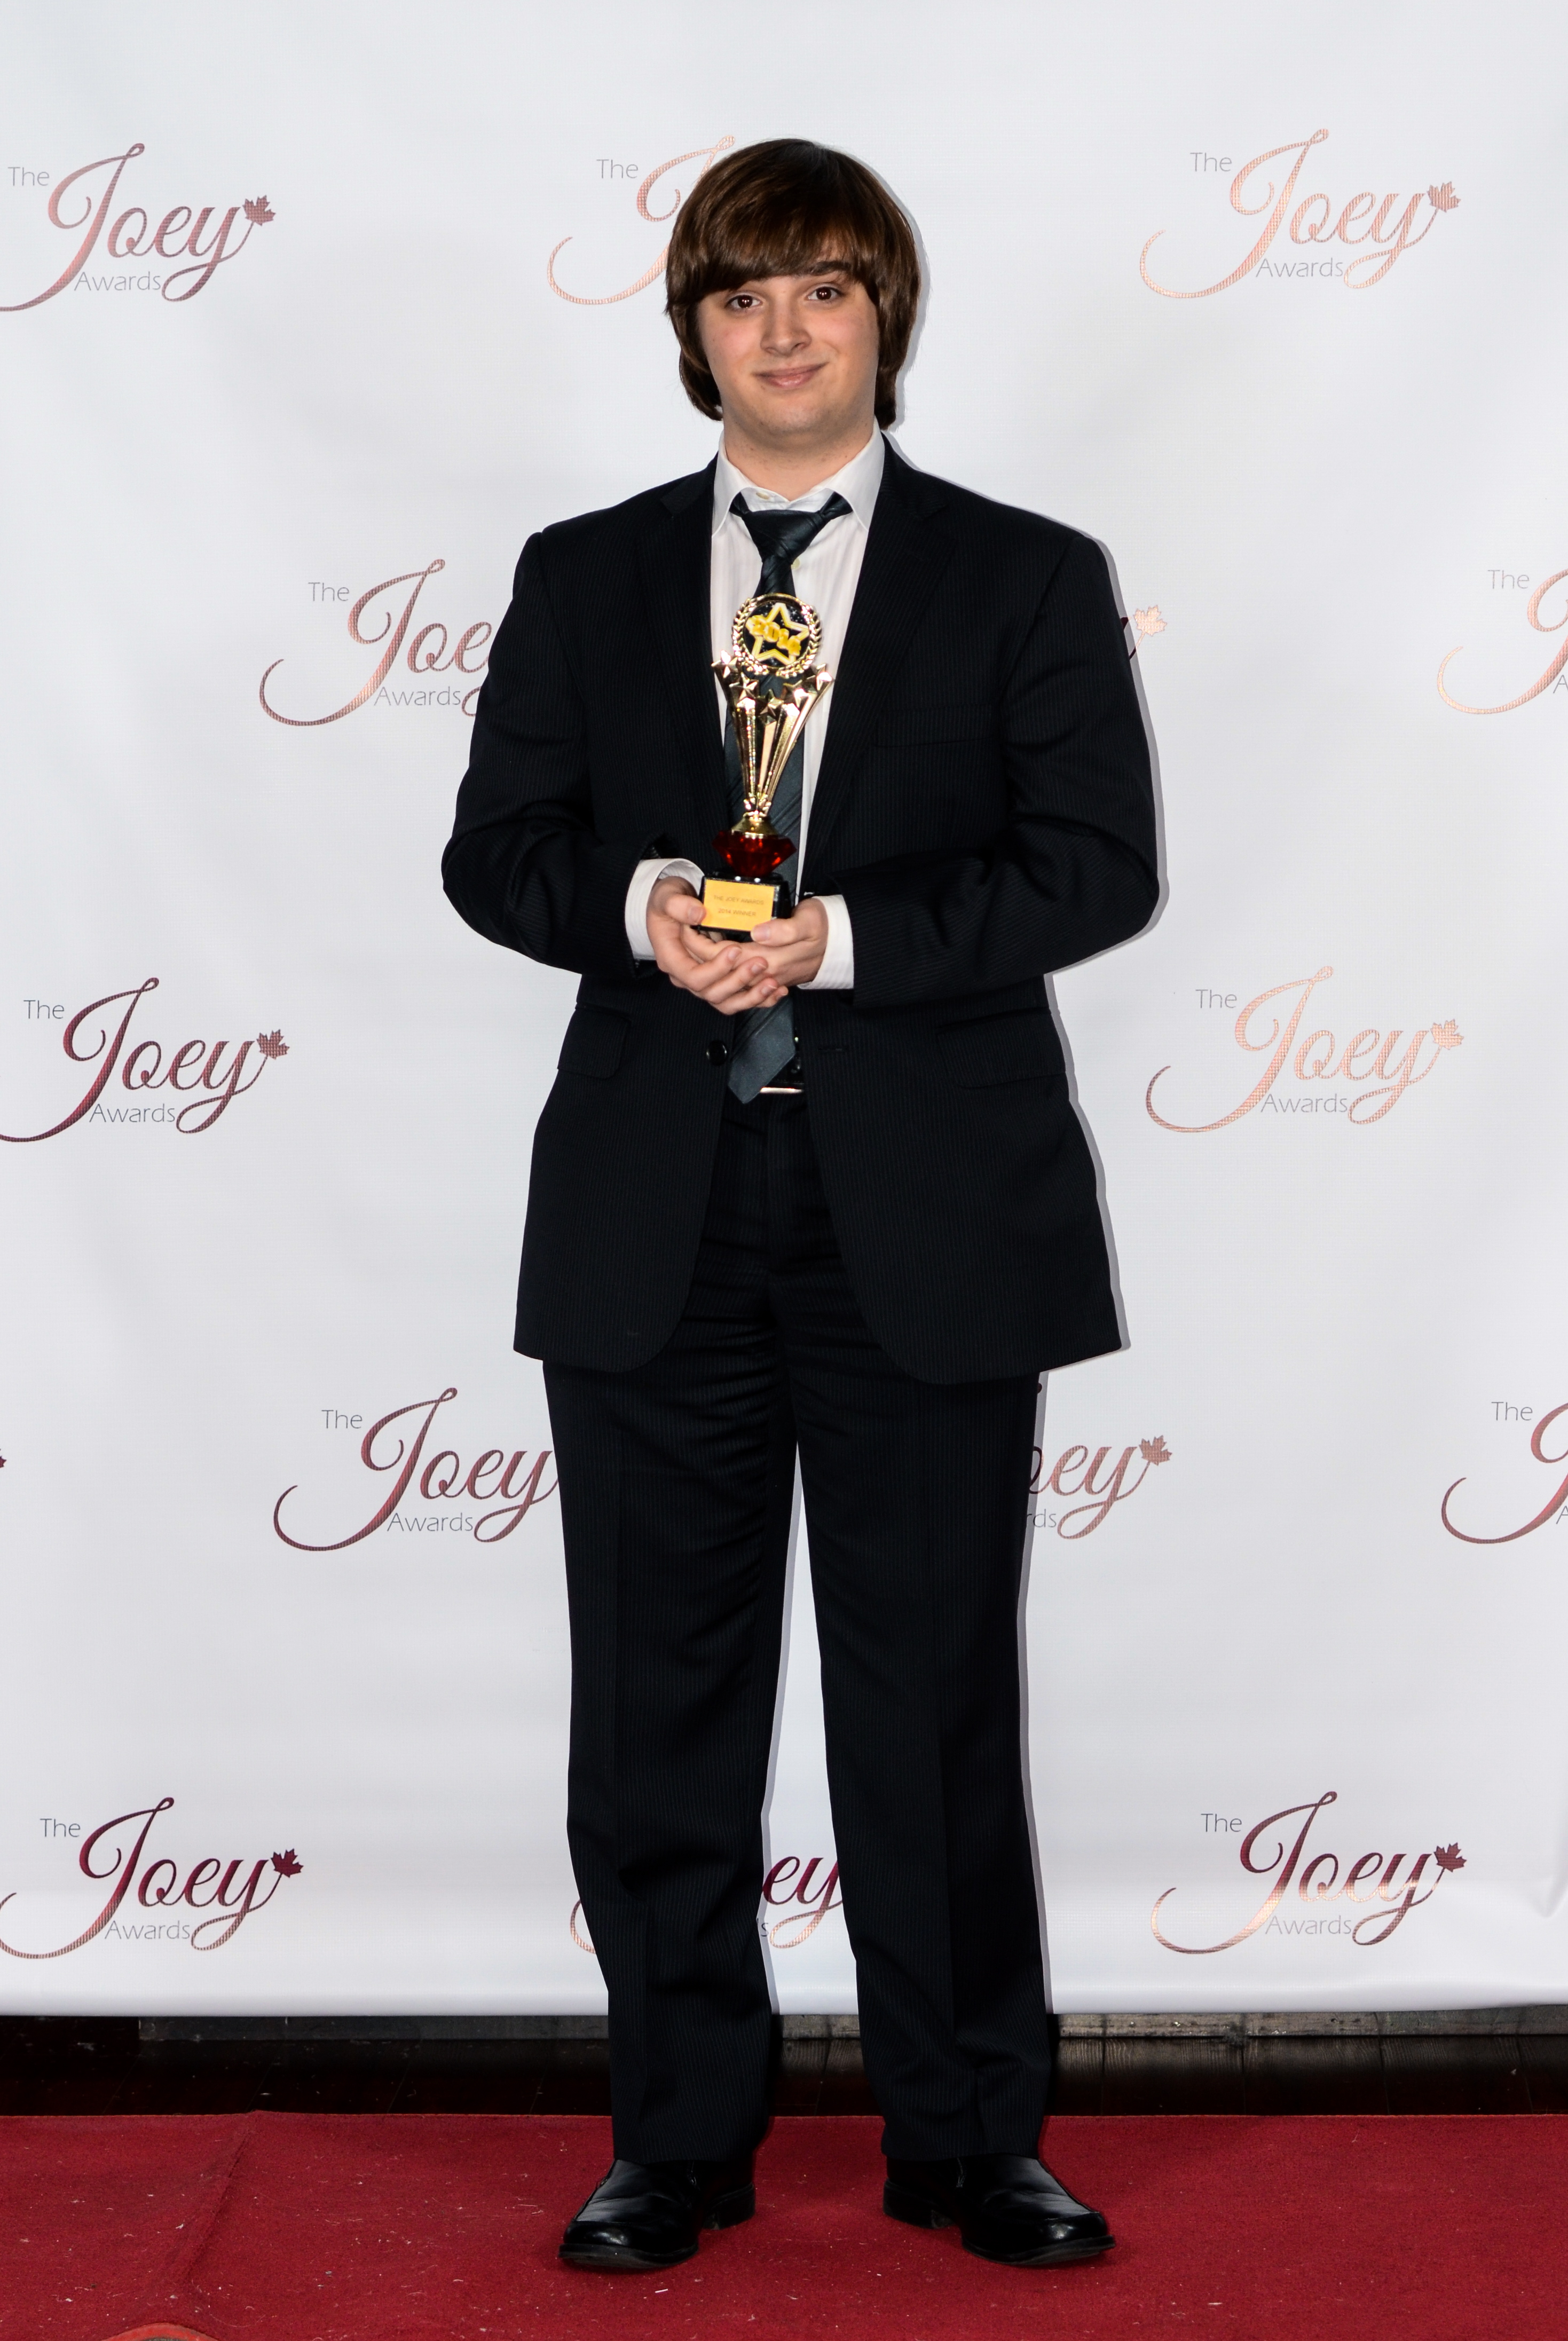 Winner of 2014 Joey Award for his performance in Way Charn!